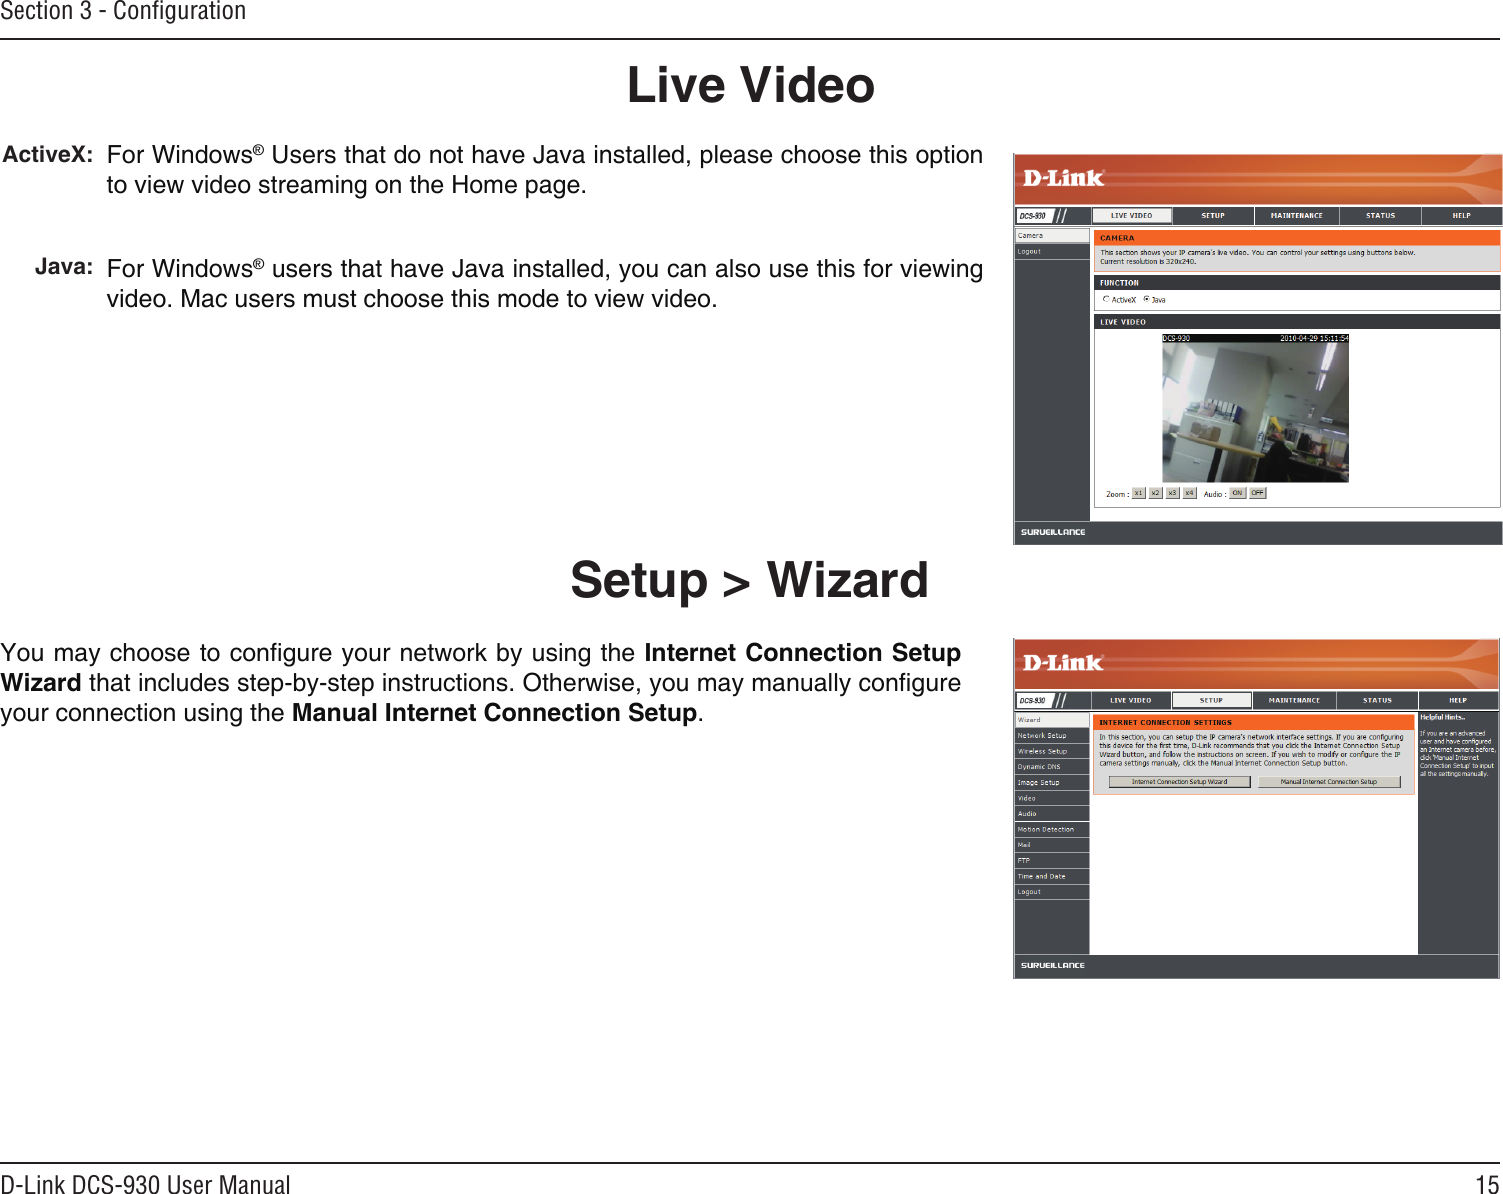 15D-Link DCS-930 User ManualSection 3 - ConﬁgurationLive VideoActiveX:  Java:For Windows® Users that do not have Java installed, please choose this option to view video streaming on the Home page.For Windows® users that have Java installed, you can also use this for viewing video. Mac users must choose this mode to view video. Setup &gt; WizardYou may choose to congure your network by using the Internet Connection Setup Wizard that includes step-by-step instructions. Otherwise, you may manually congure your connection using the Manual Internet Connection Setup.